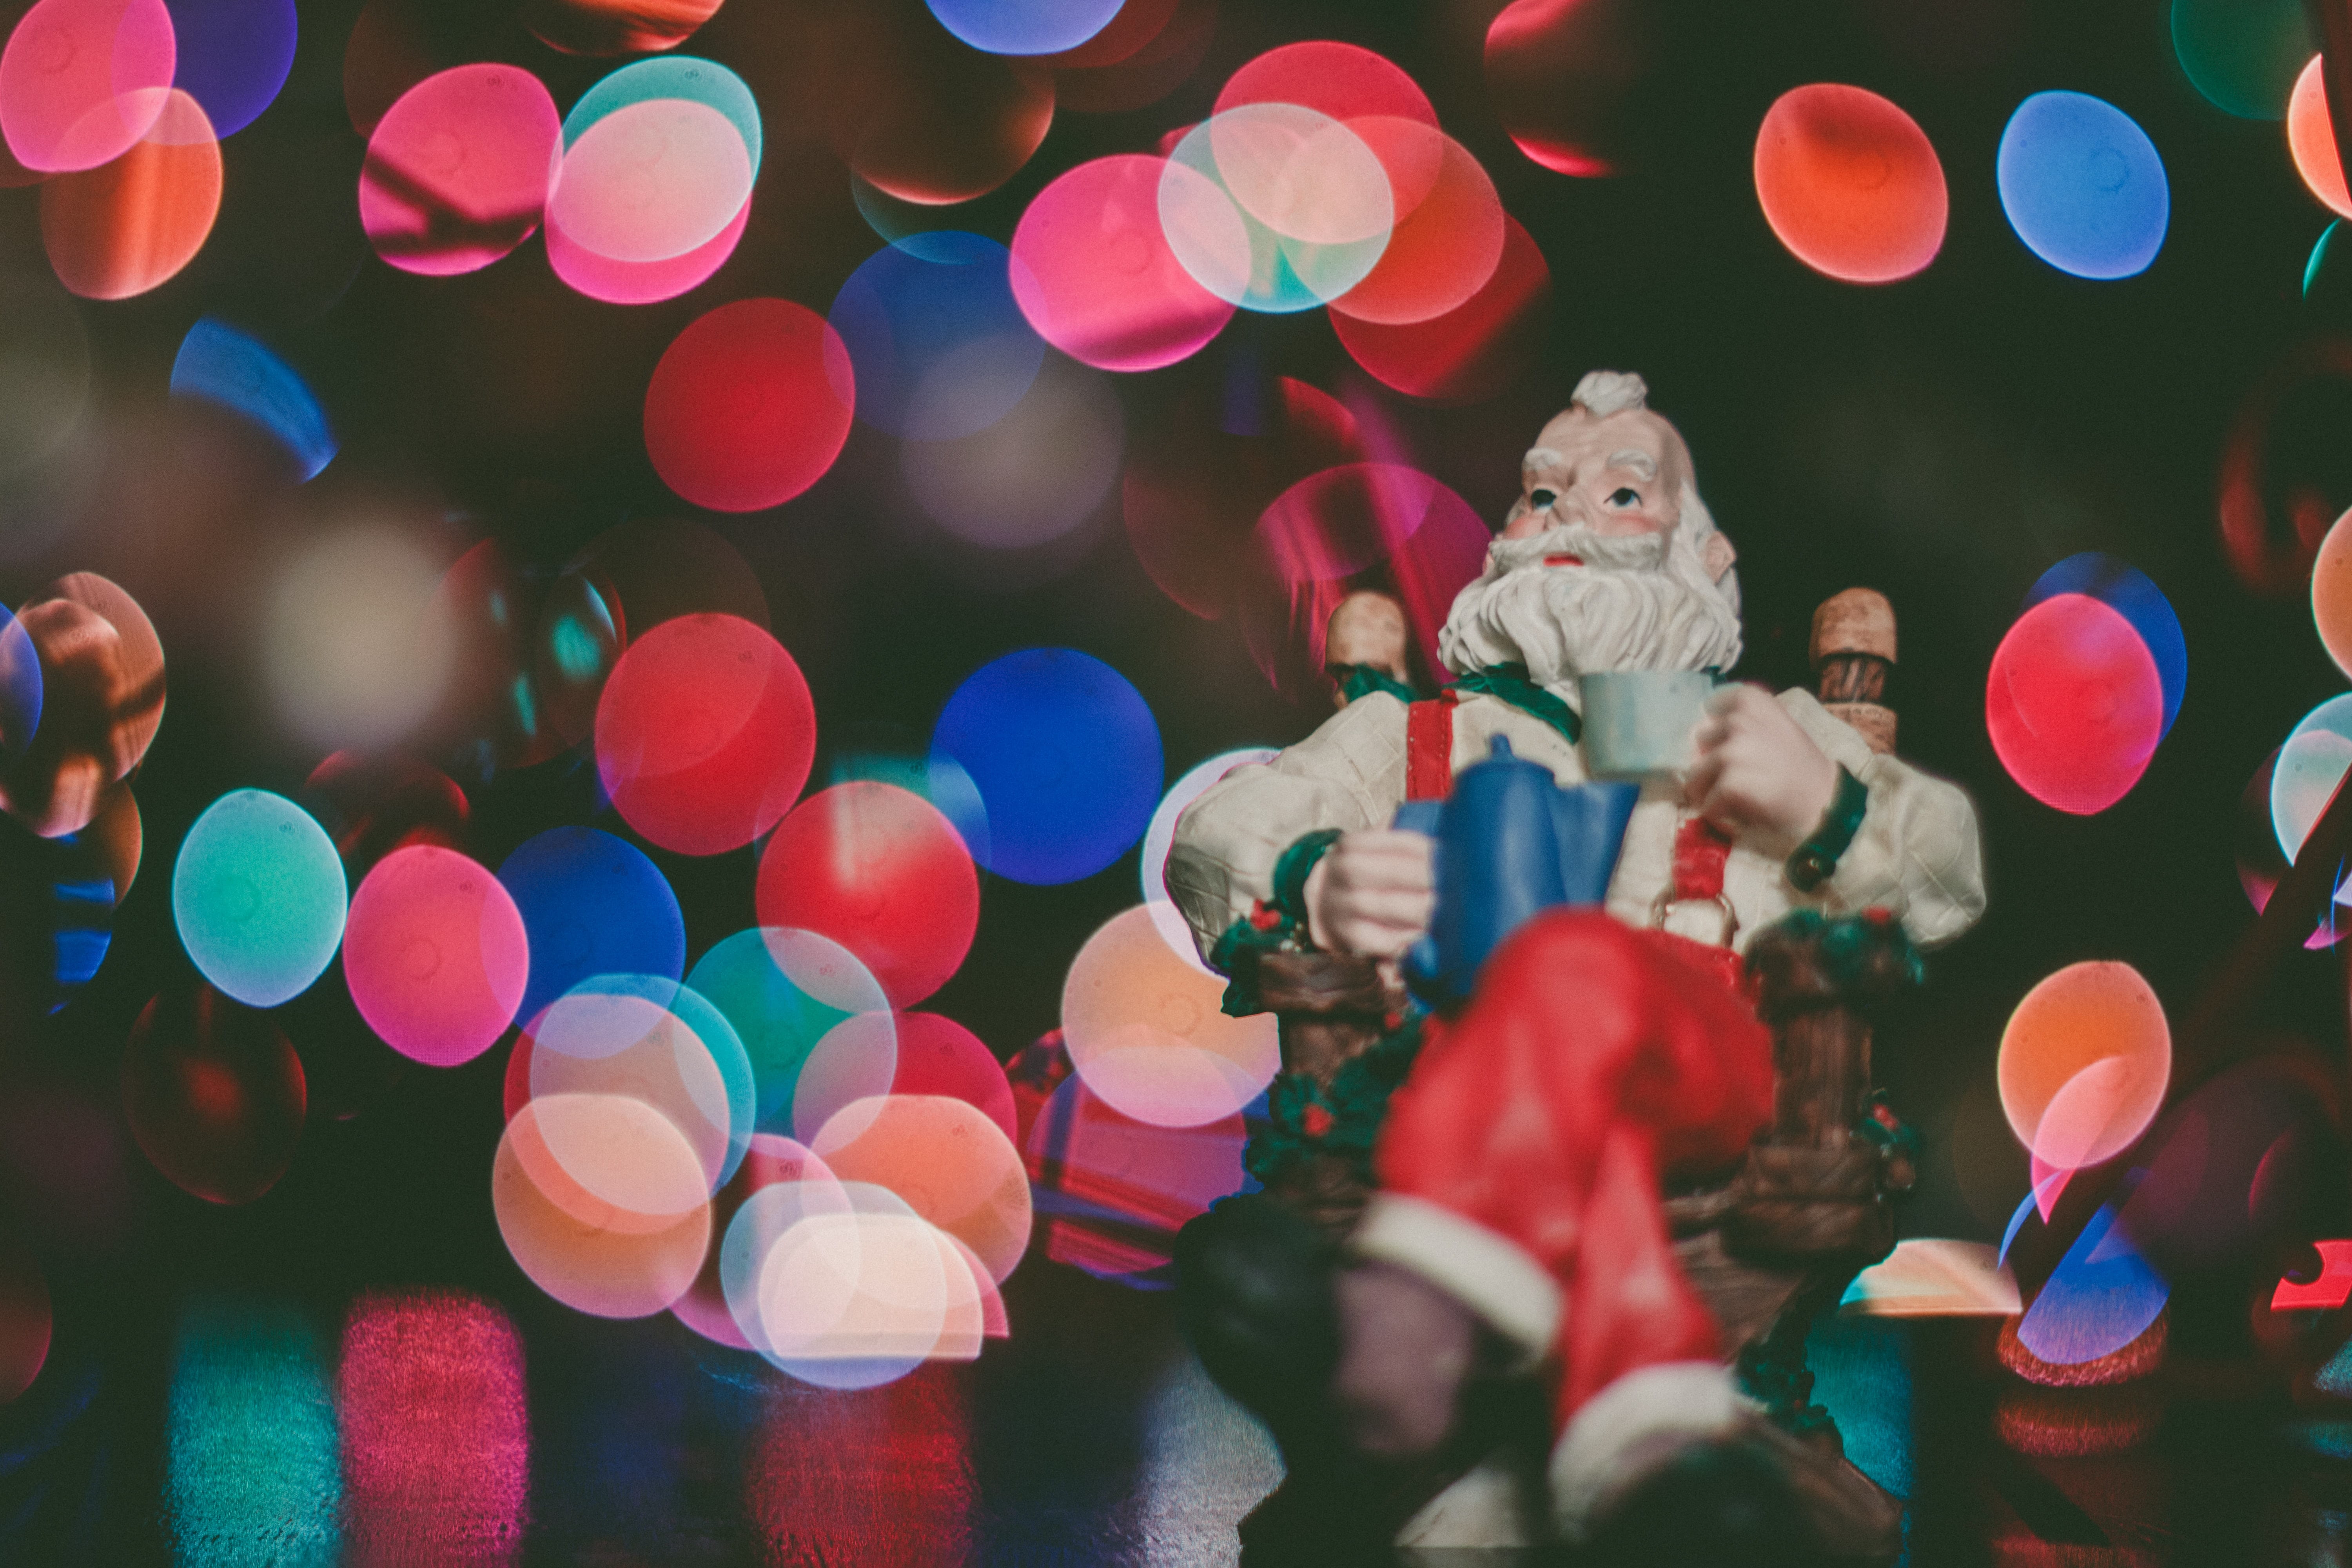 Ornament of Santa with a bokeh background